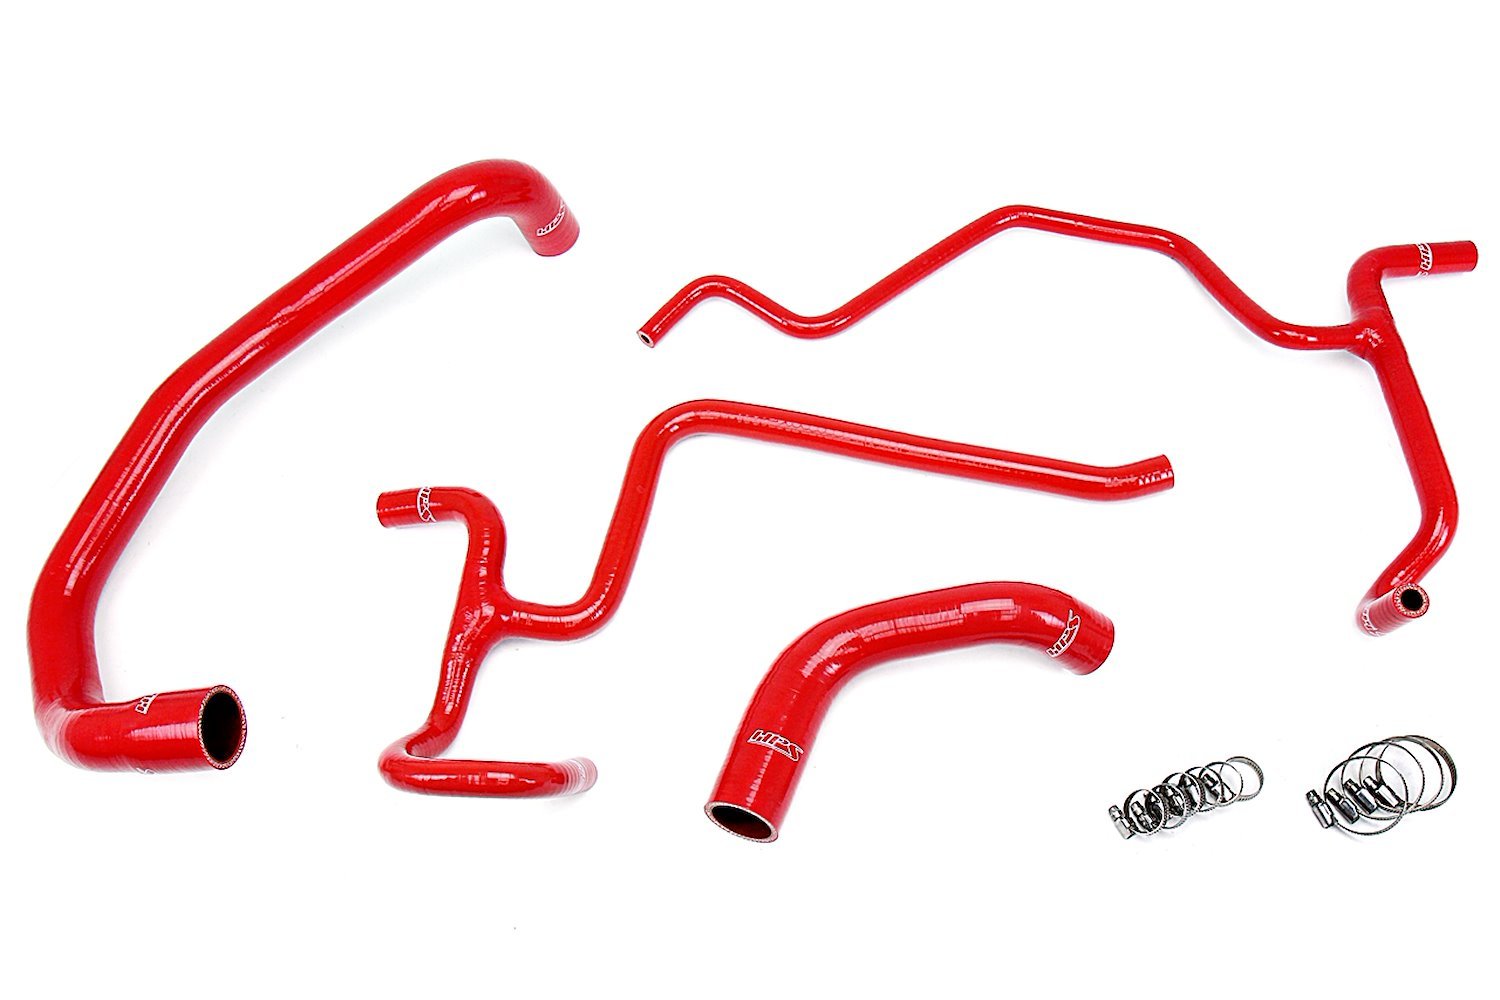 57-1326-RED Radiator Hose Kit, High-Temp 3-Ply Reinforced Silicone, Replace OEM Rubber Radiator Coolant Hoses